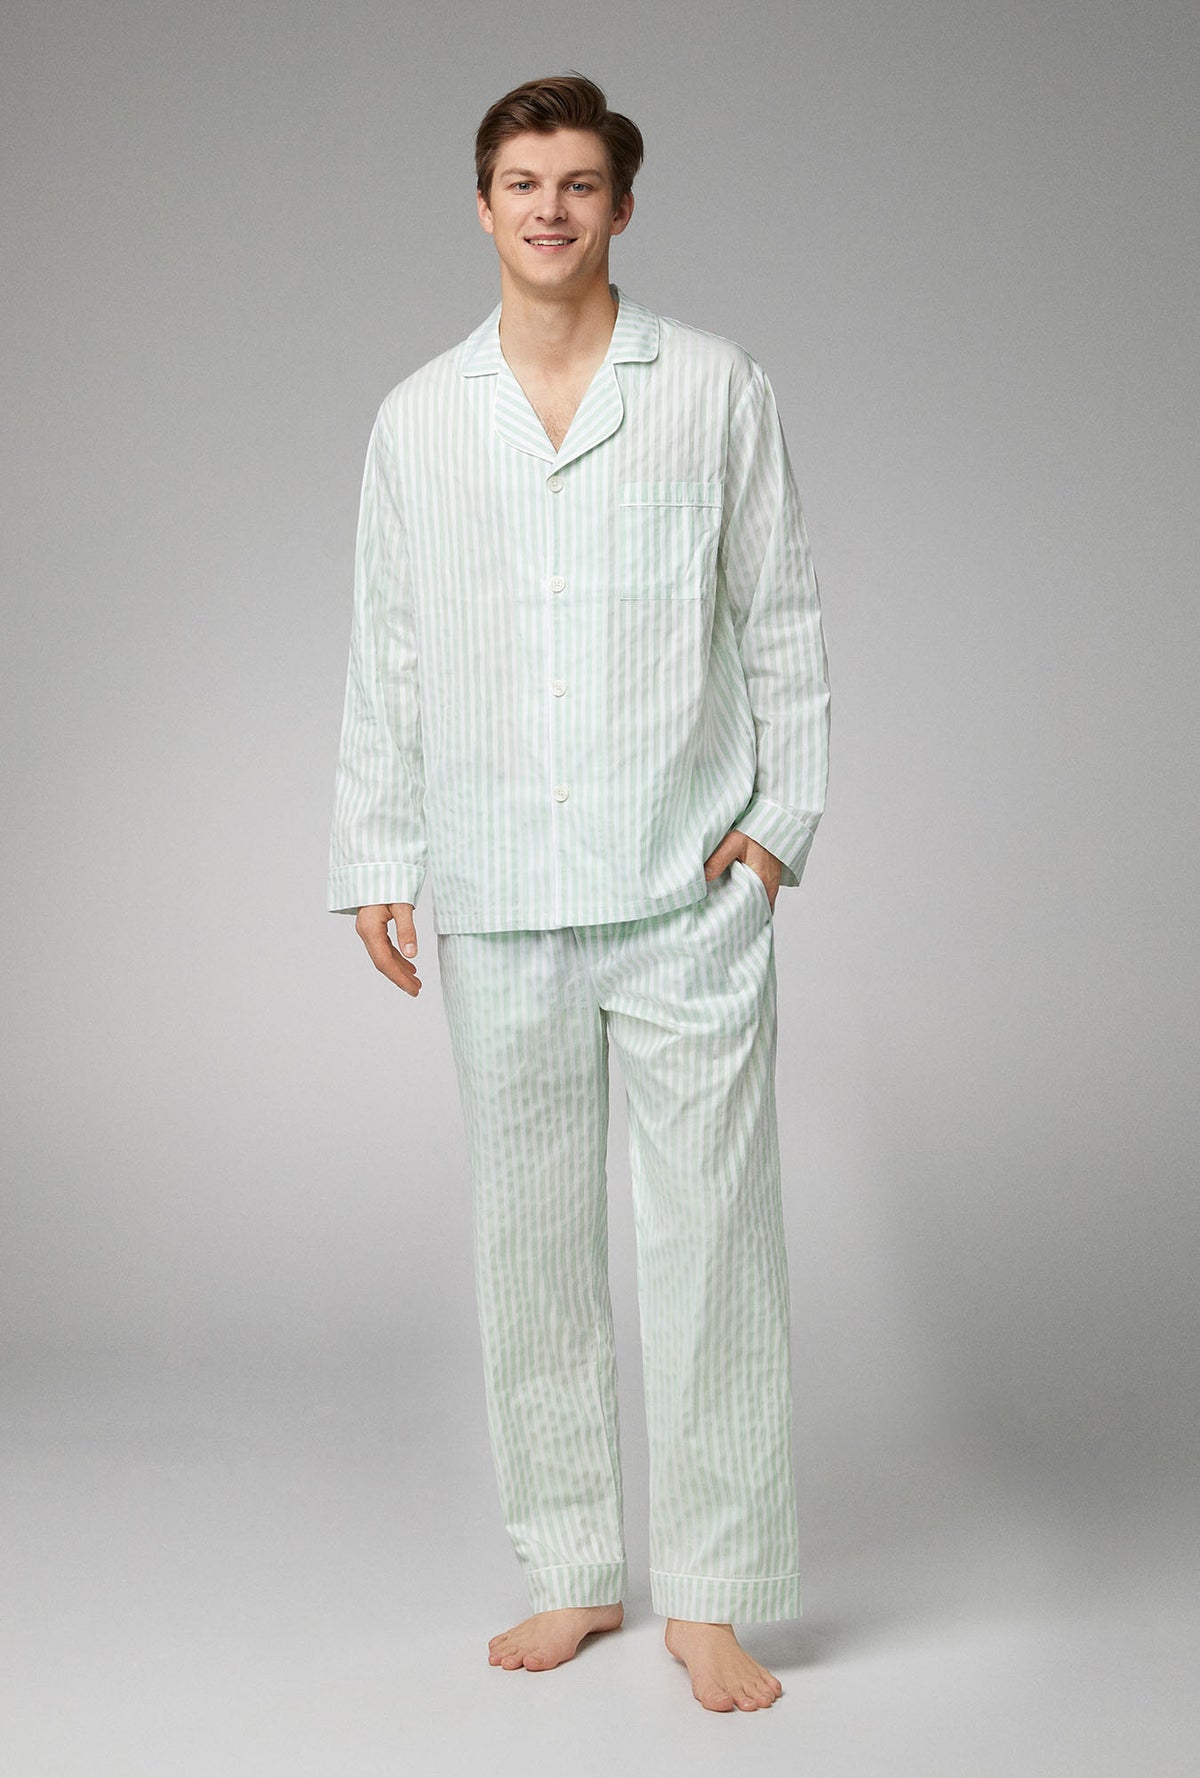 Men's Long Sleeve Striped Pajamas - Charcoal in Men's Cotton